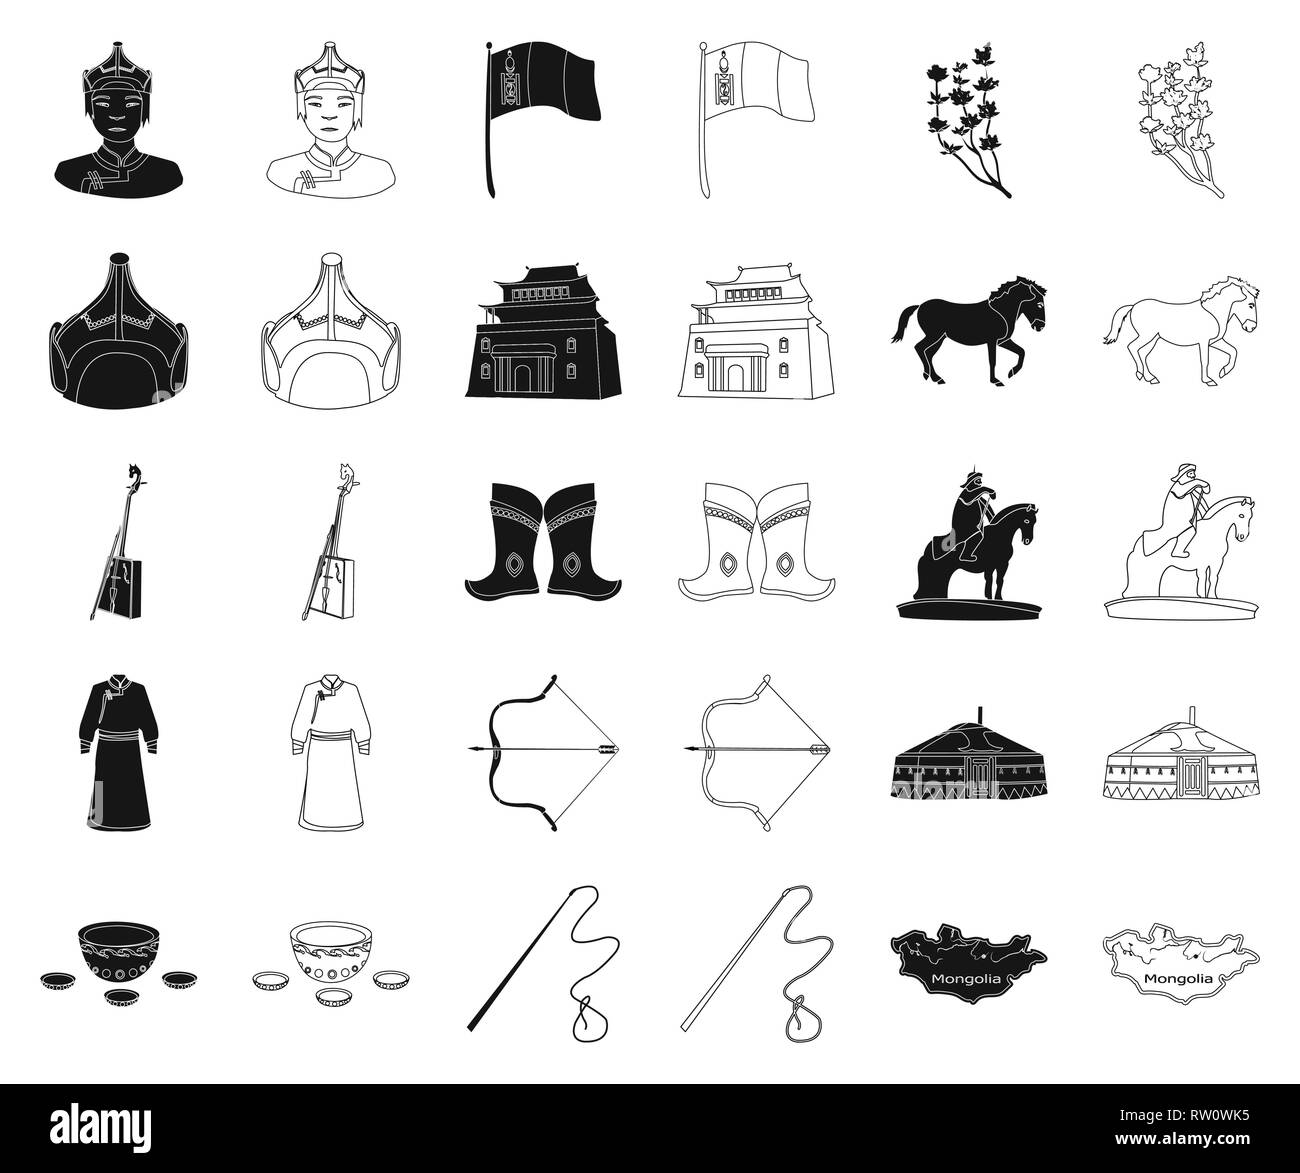 arms,arrow,belt,black,outline,bow,buddhism,building,cashmere,coat,collection,country,culture,flag,flower,fur,genghis,gutuly,headdress,horse,hudak,icon,illustration,instrument,khan,kialis,kumis,landmark,leather,map,monastery,mongol,mongolia,monument,musical,nature,religion,robe,set,shoes,sign,spear,temple,territory,tradition,travel,vector,whip,wool,yurt Vector Vectors , Stock Vector